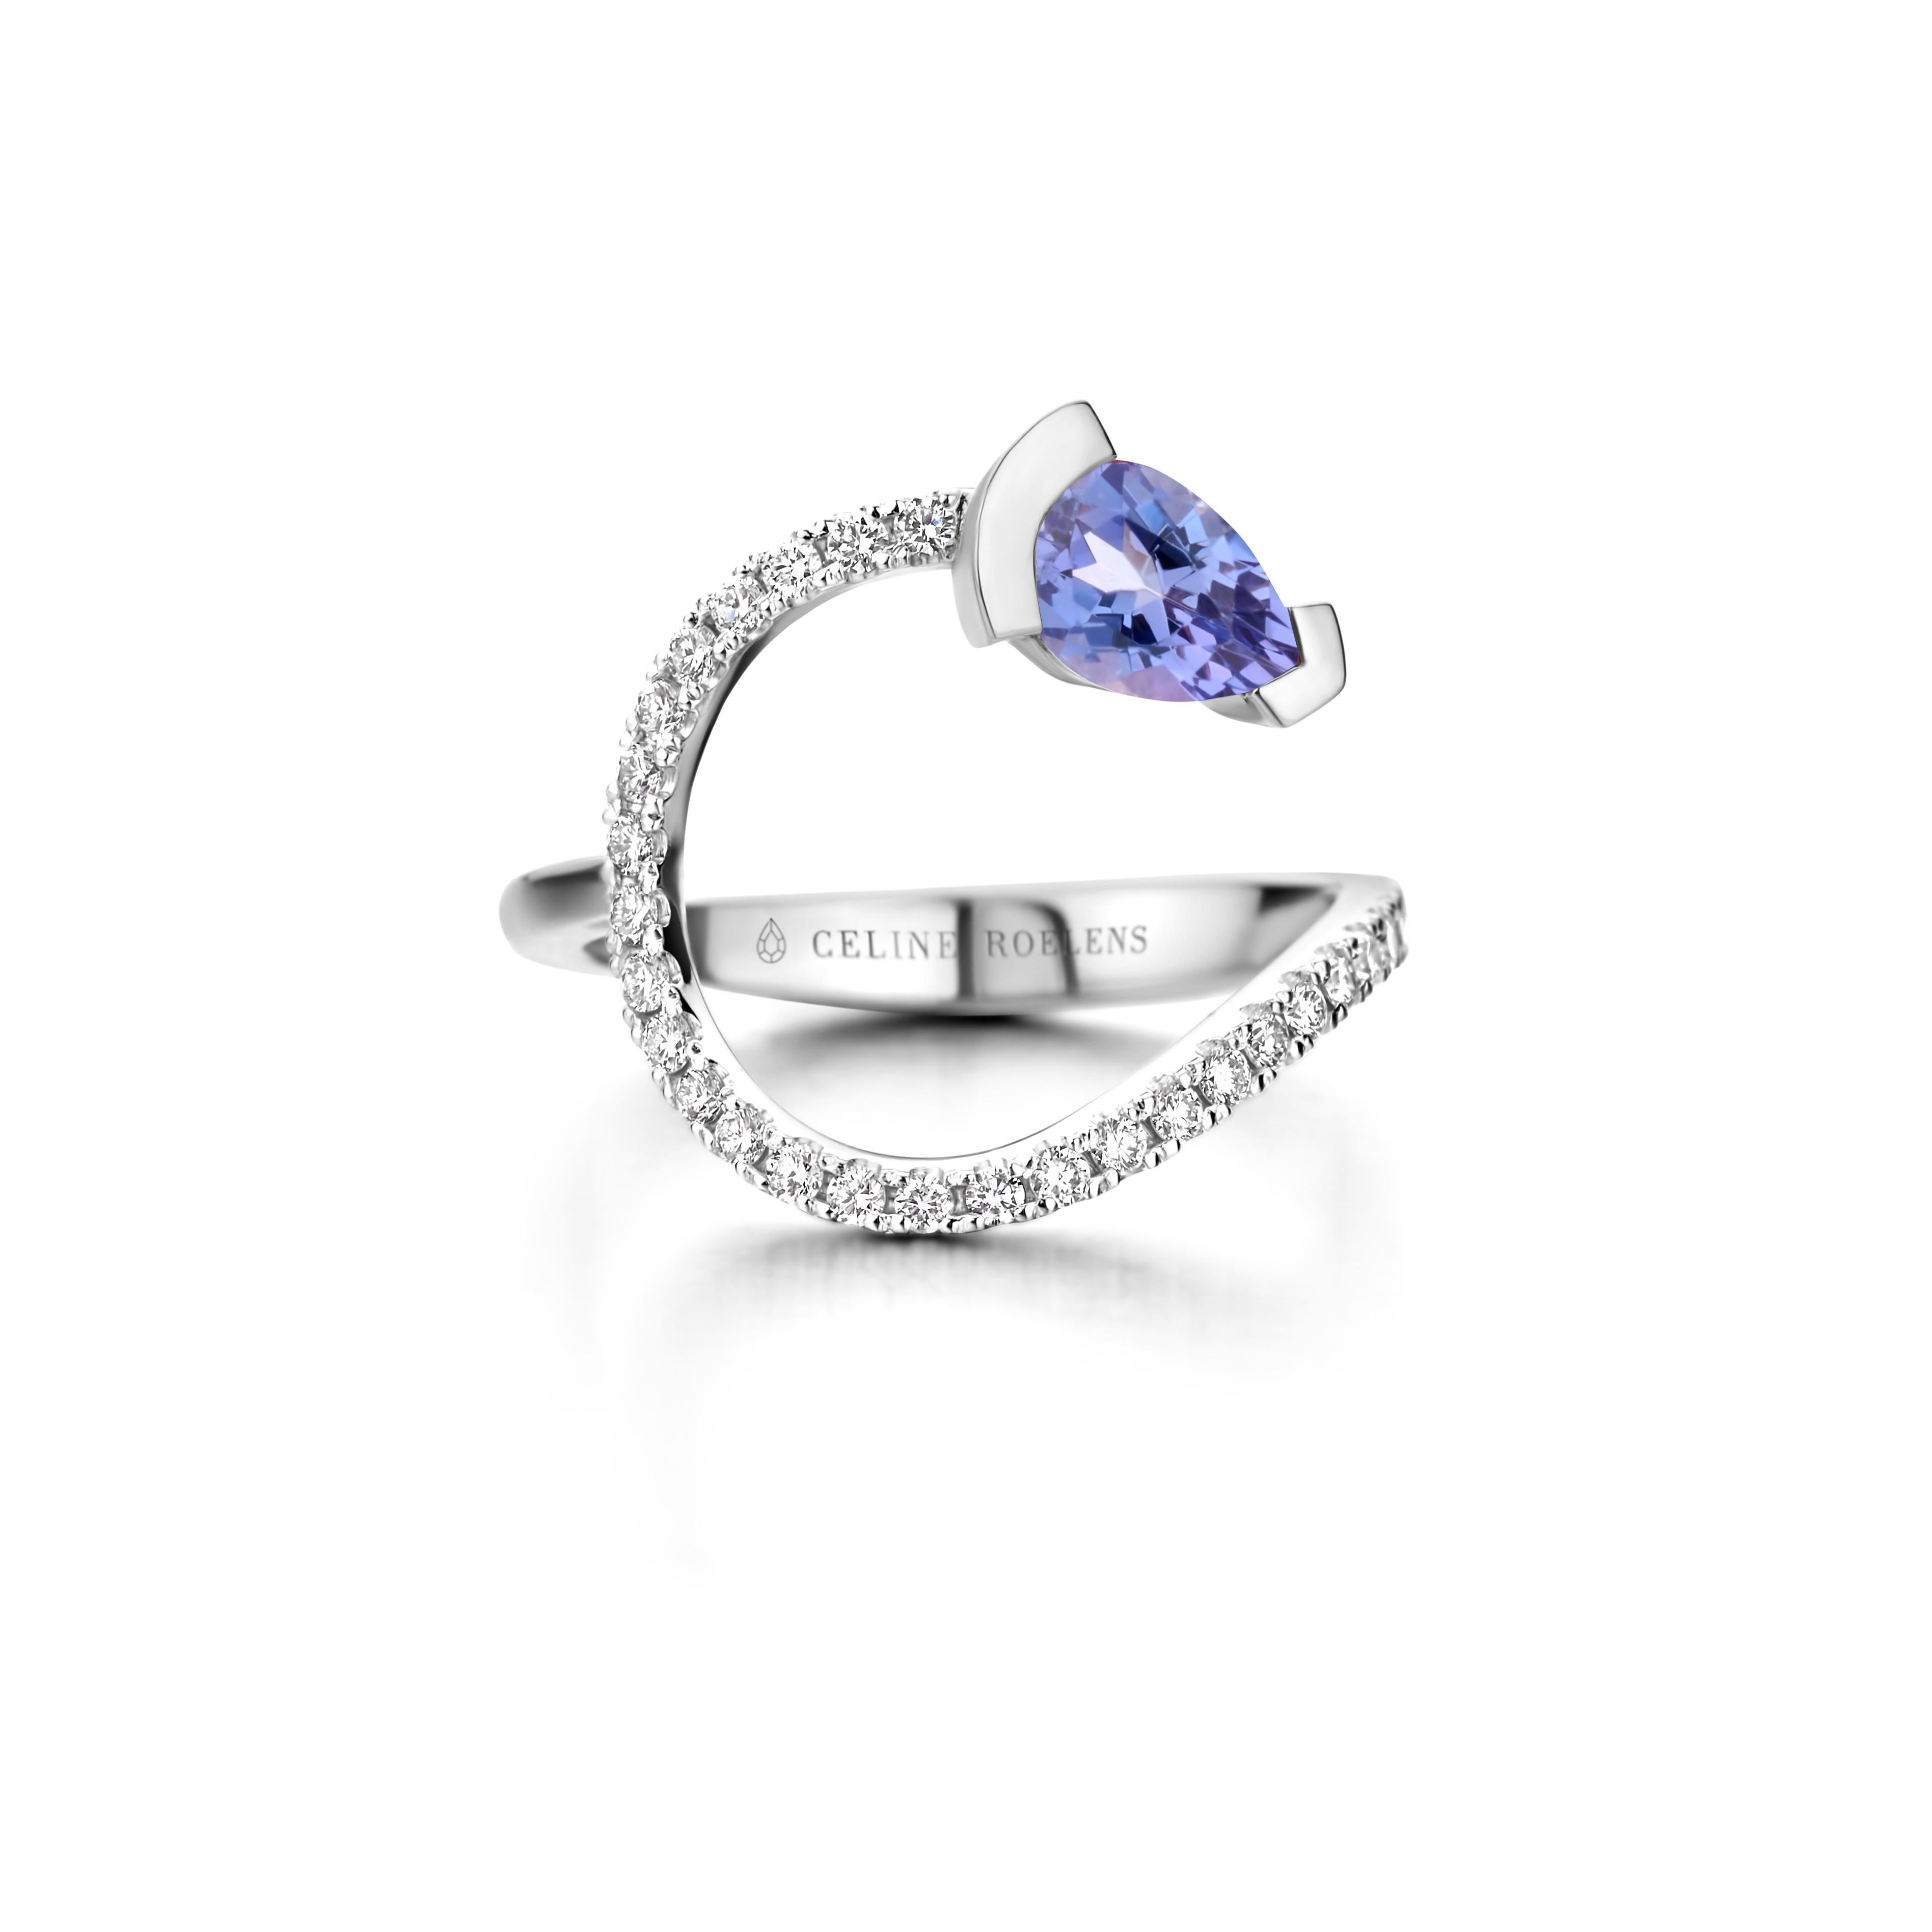 ADELINE curved ring in 18Kt rose gold set with a pear shaped Tanzanite and 0,33 Ct of white brilliant cut diamonds - VS F quality.